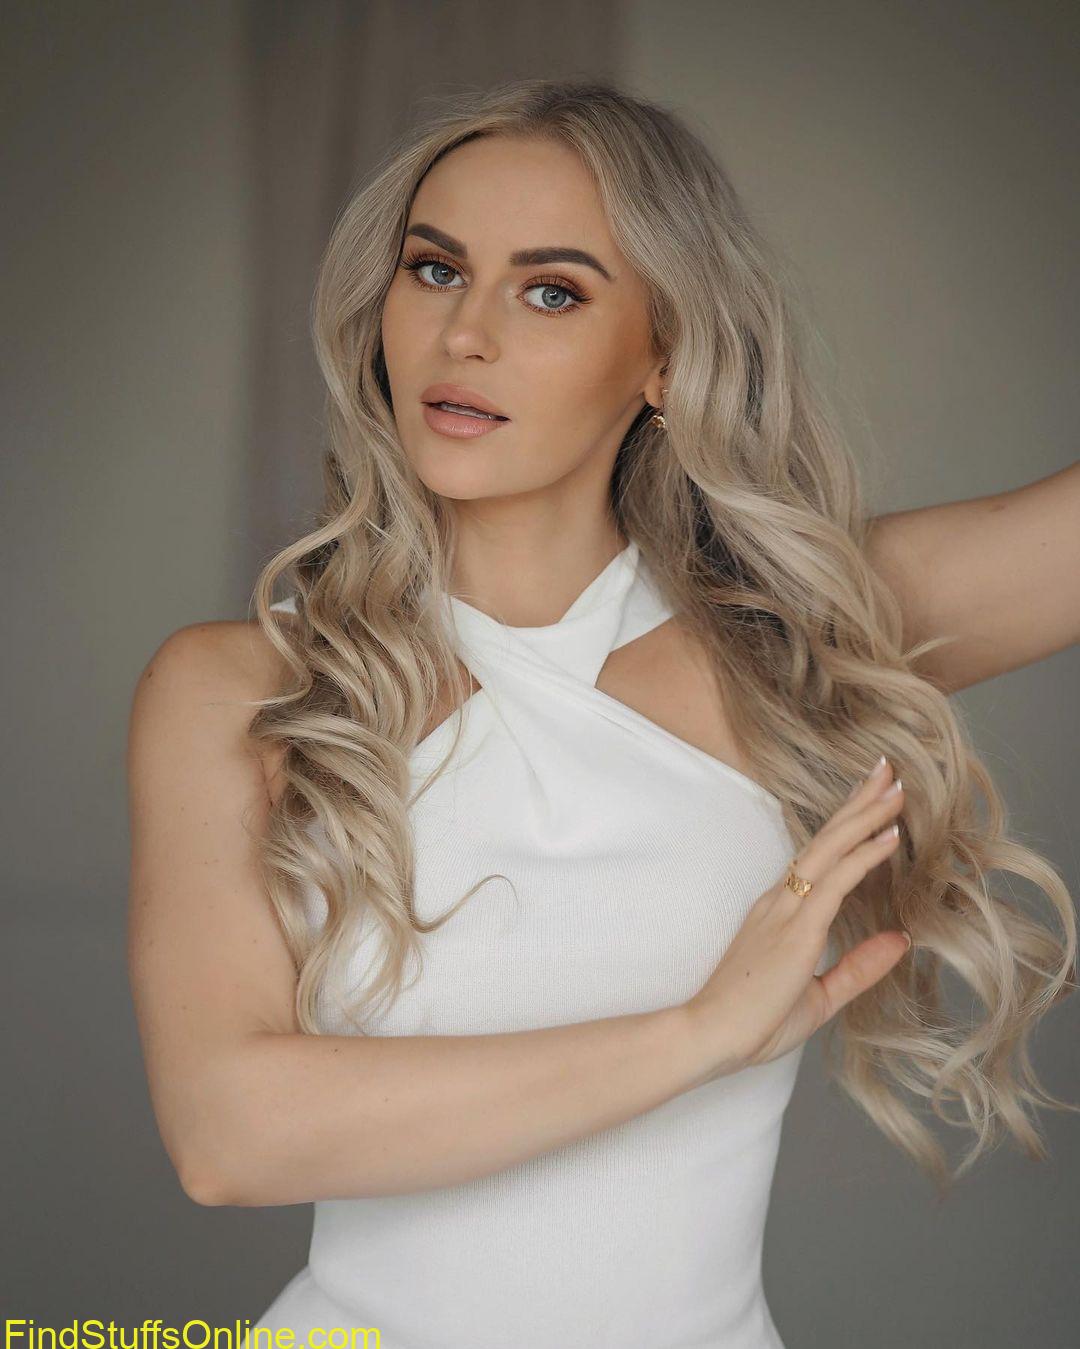 model anna Nystrom hot images 18